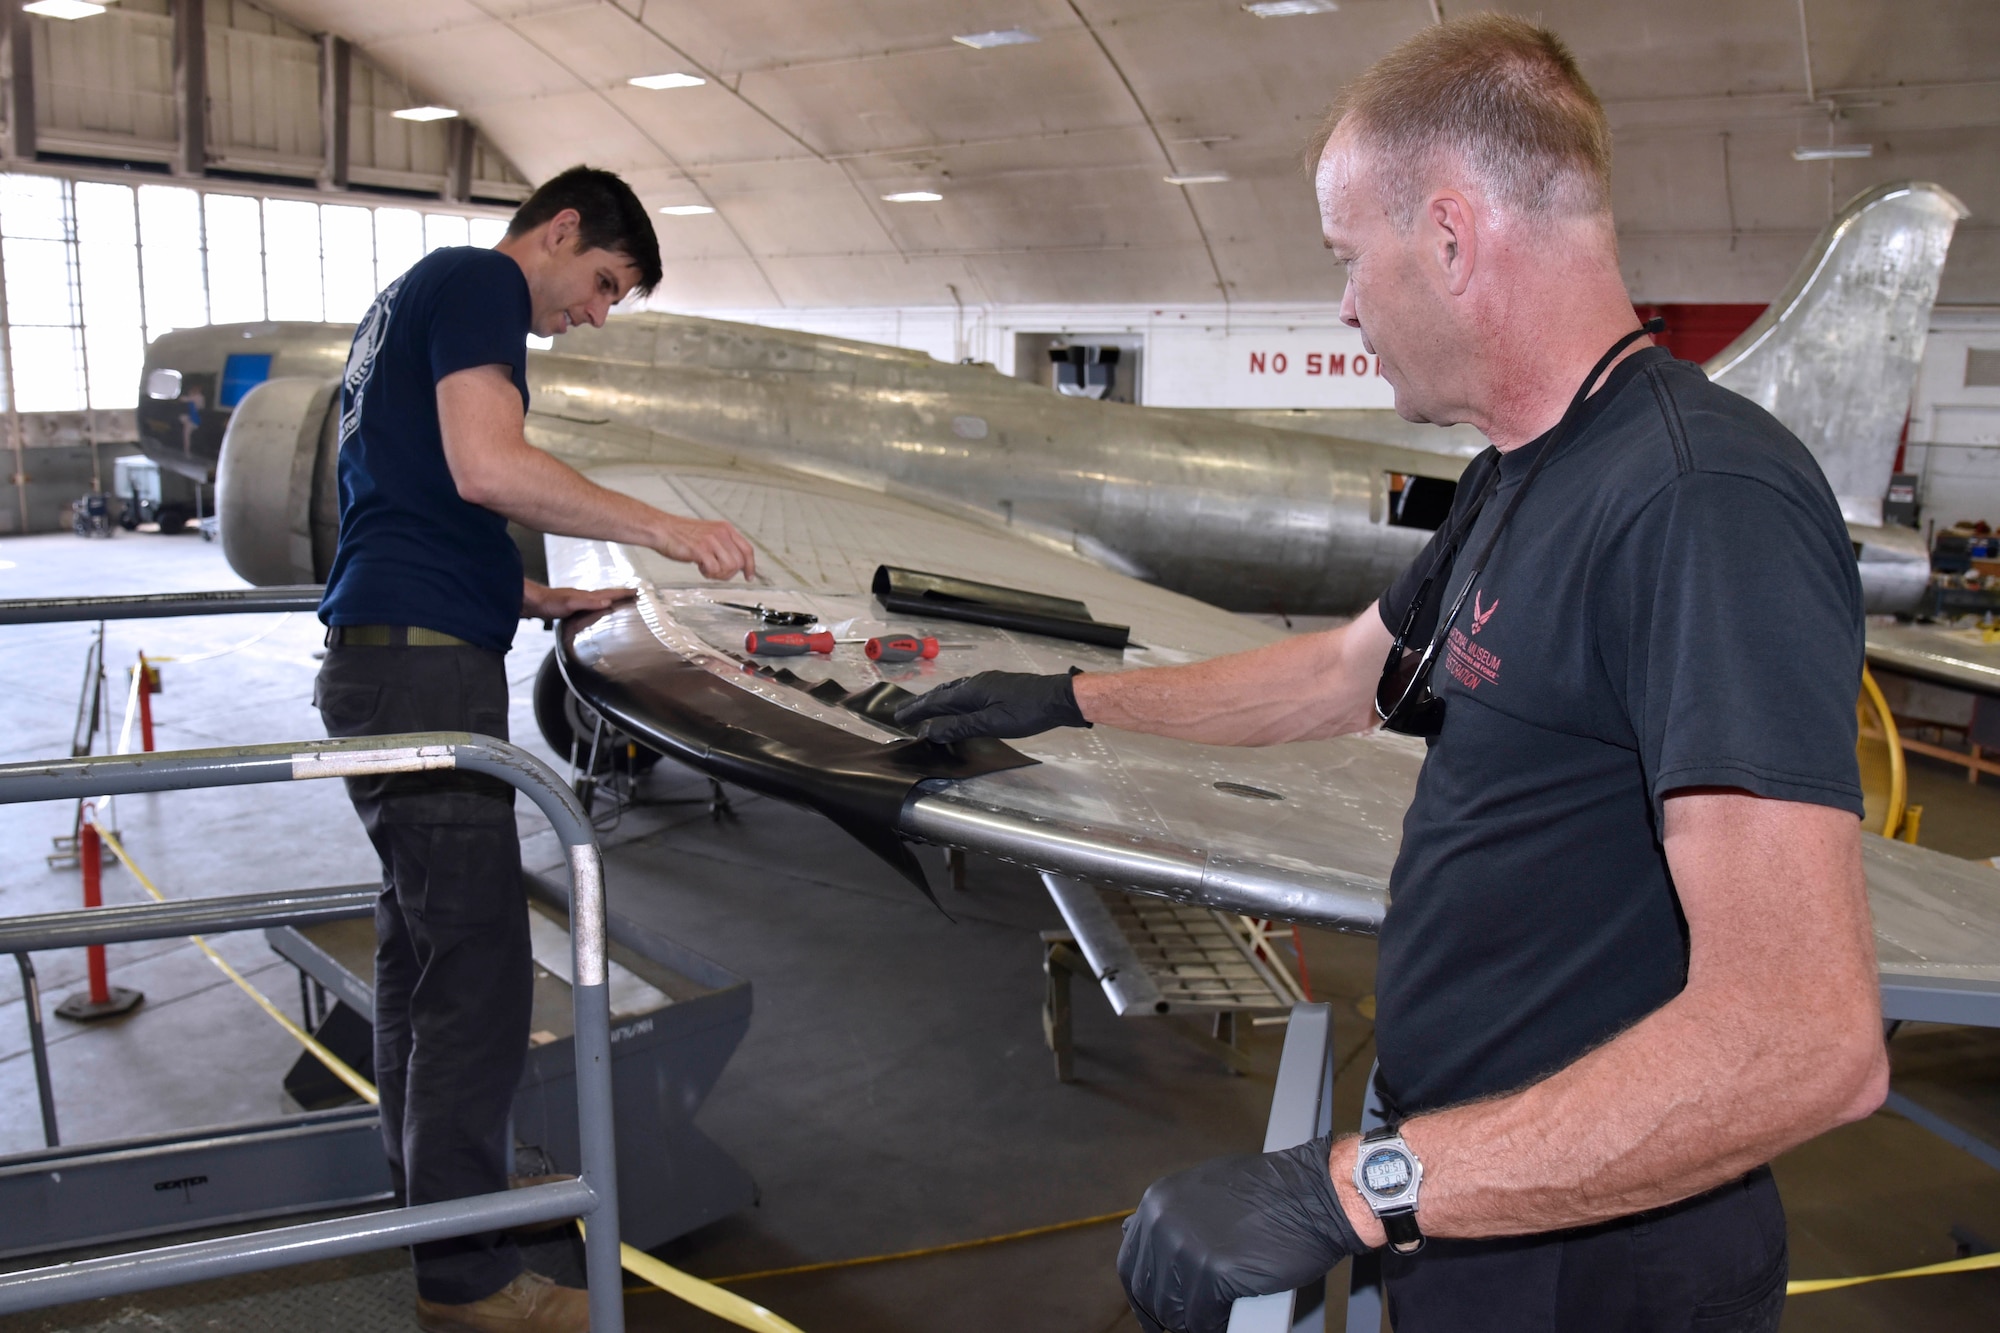 DAYTON, Ohio (06/2017) -- (From left to right) Restoration Specialists Casey Simmons and Brian Lindamood work on the B-17F "Memphis Belle"™ in the restoration hangar at the National Museum of the U.S. Air Force. The exhibit opening for this aircraft is planned for May 17, 2018.(U.S. Air Force photo by Ken LaRock)